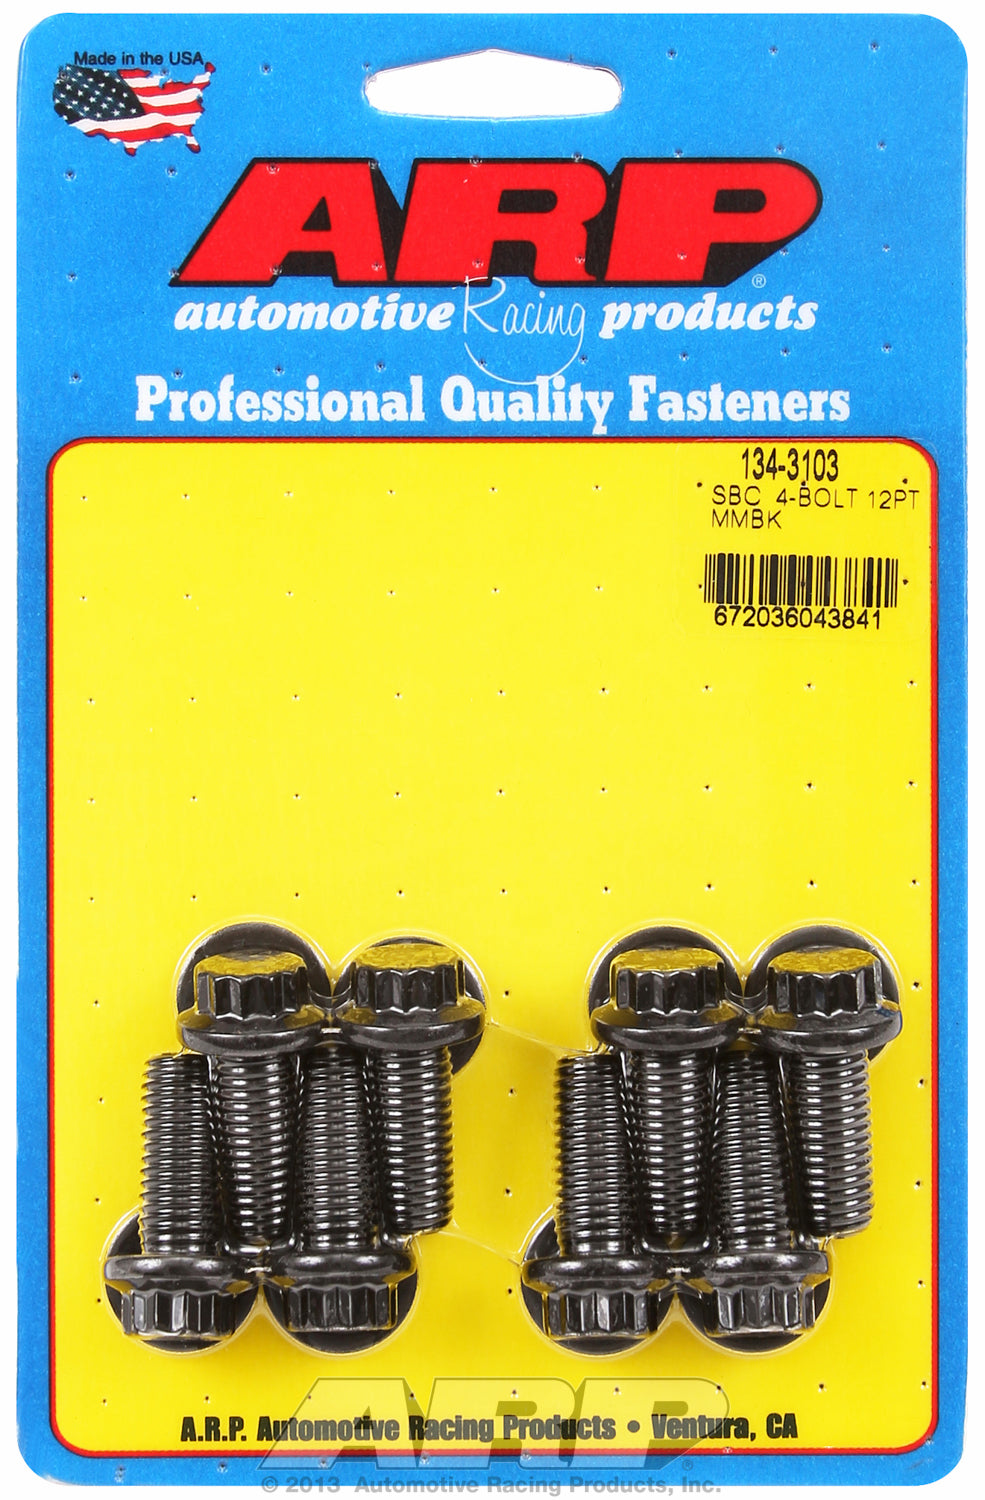 Motor Mount Kit for Chevy, LS Series small block mount bracket to block (8 pc.) Black Oxide - 12-Pt